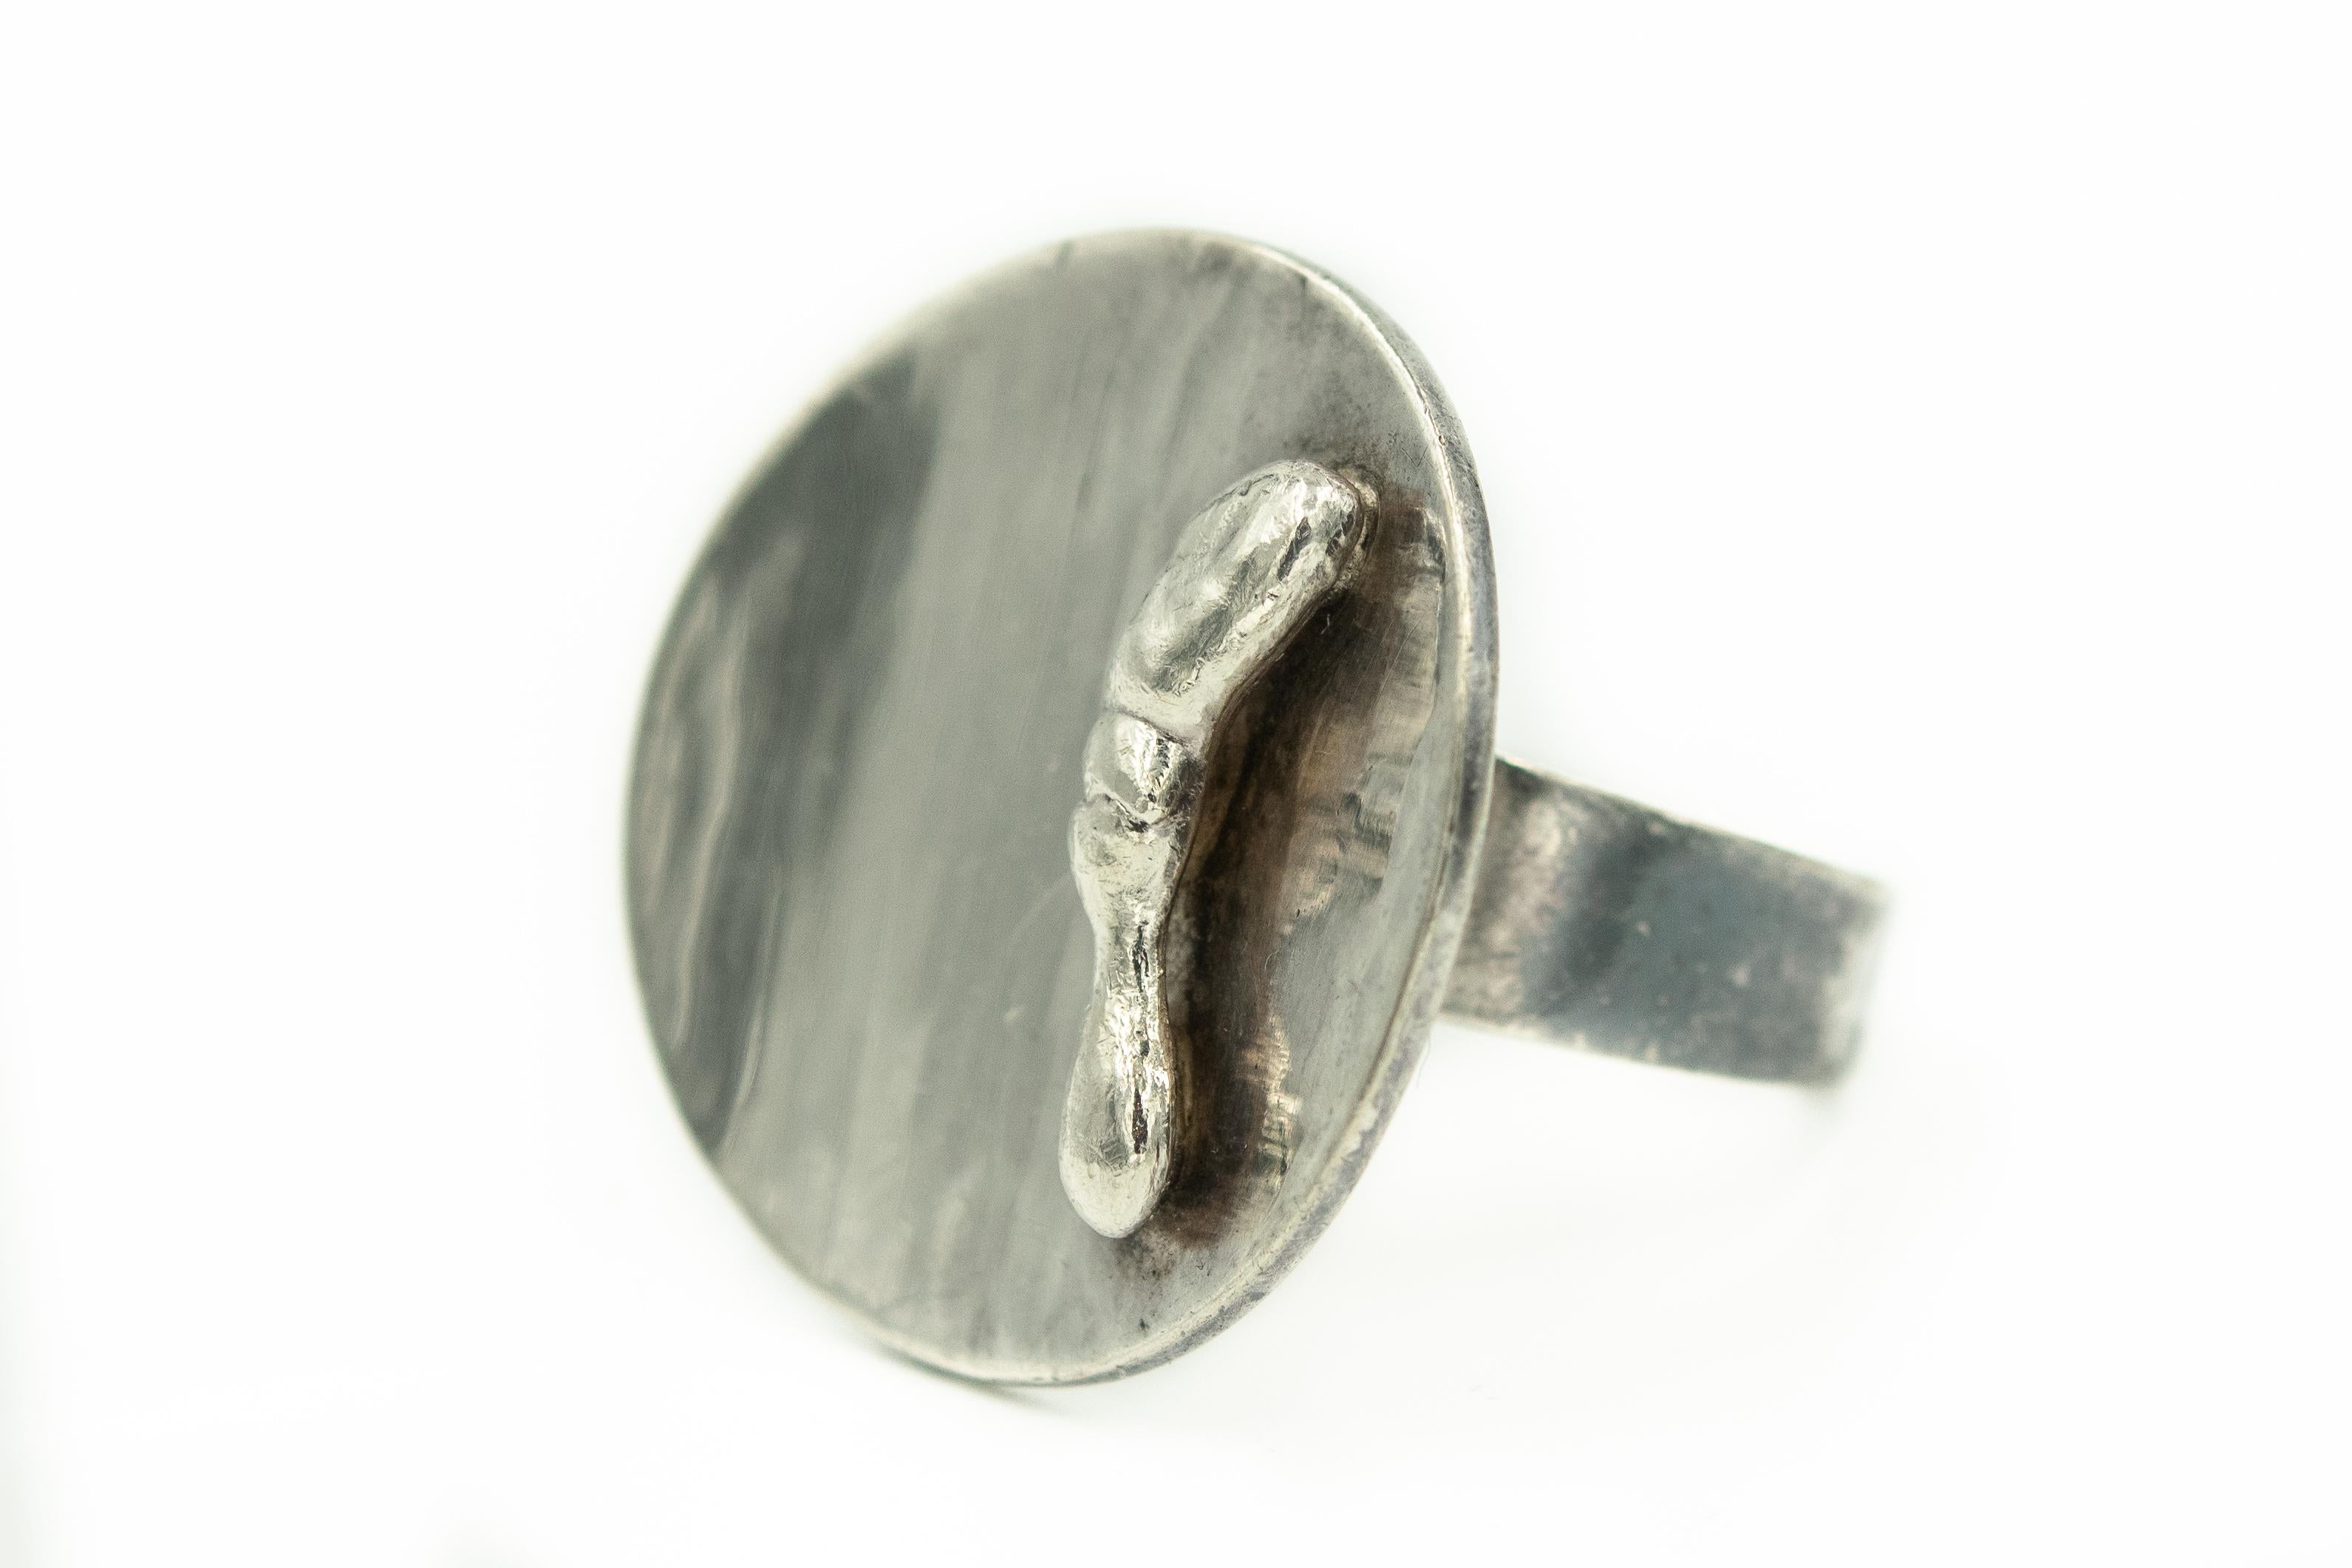 IB Bluitgen Denmark Sterling Silver 925 
Vintage Denmark Scandinavian hammered style concave modernist ring with applied hand holding flame.
US ring size 7.5
Marked Denmark IB 925

Ib Bluitgen trained as a silversmith at the Georg Jensen